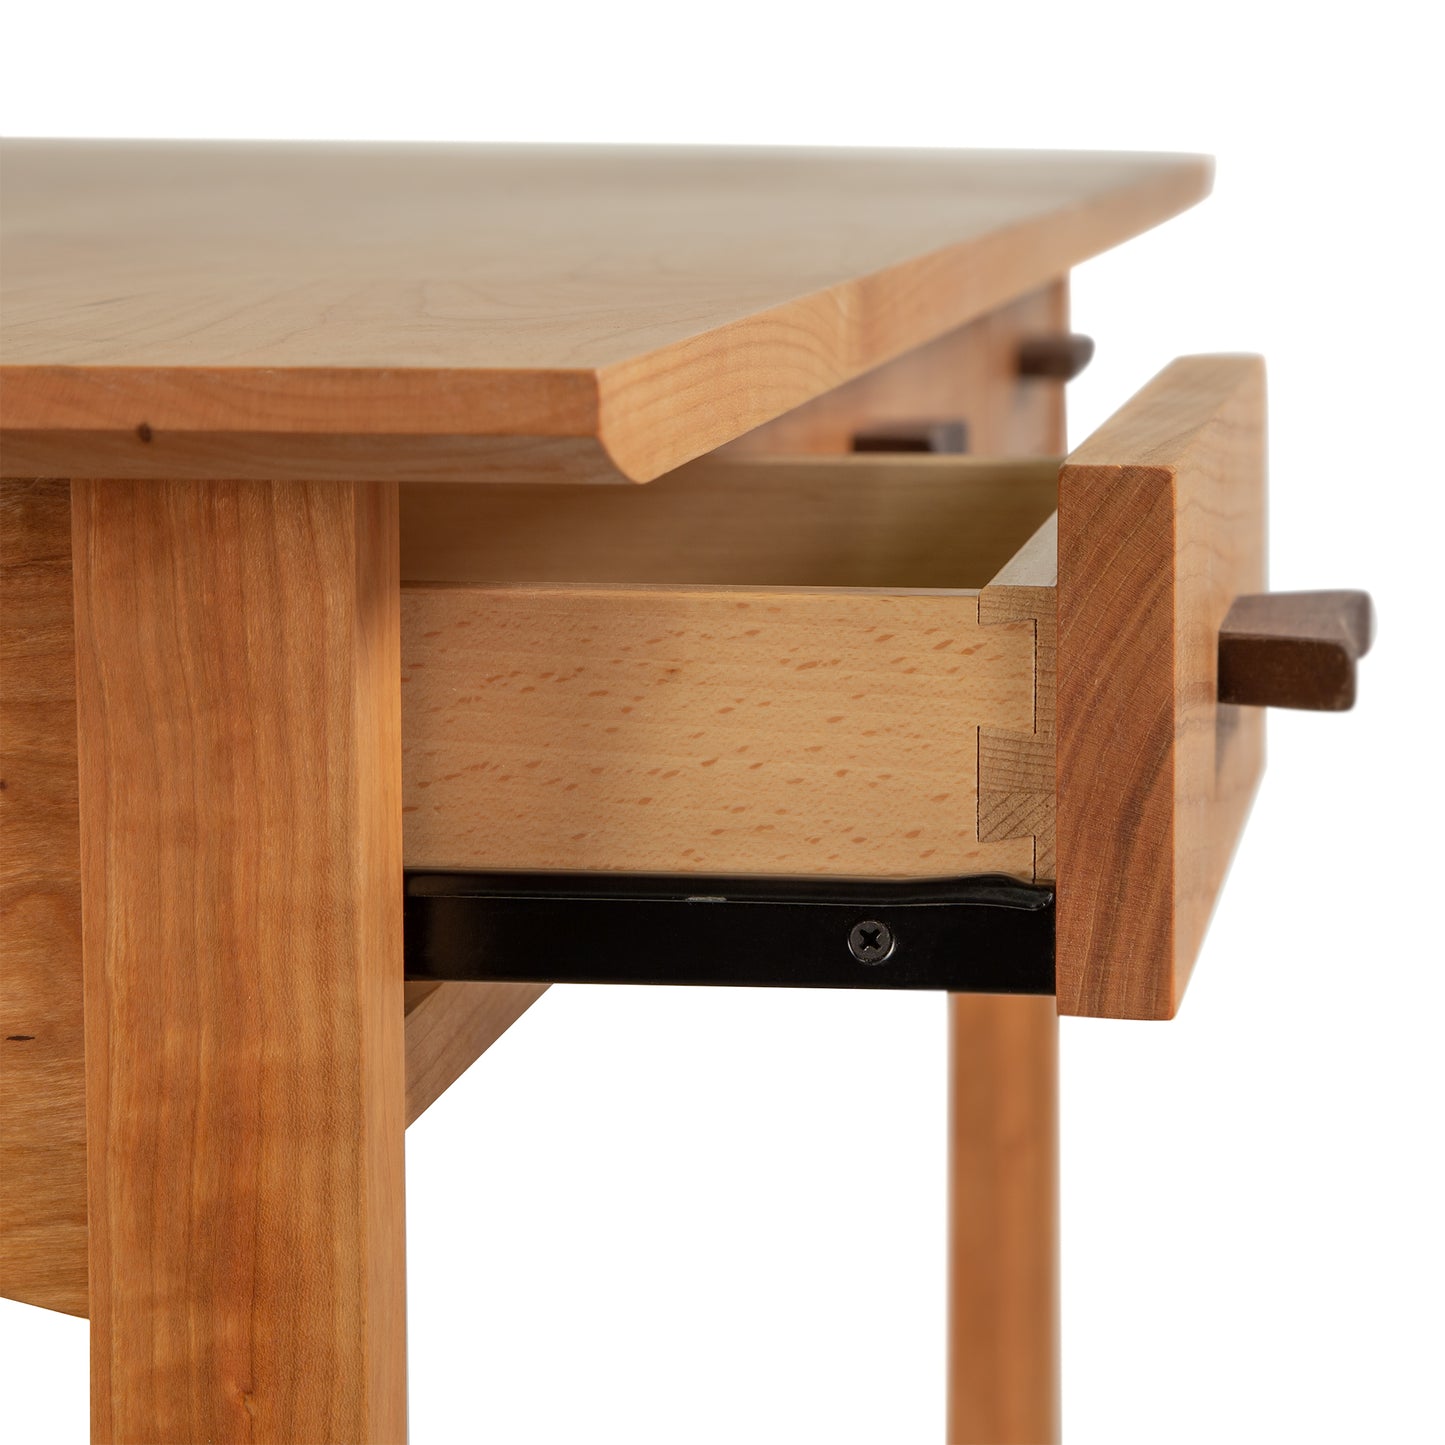 A Contemporary Craftsman Library Desk, featuring a drawer under it, with Vermont Furniture Designs office design.